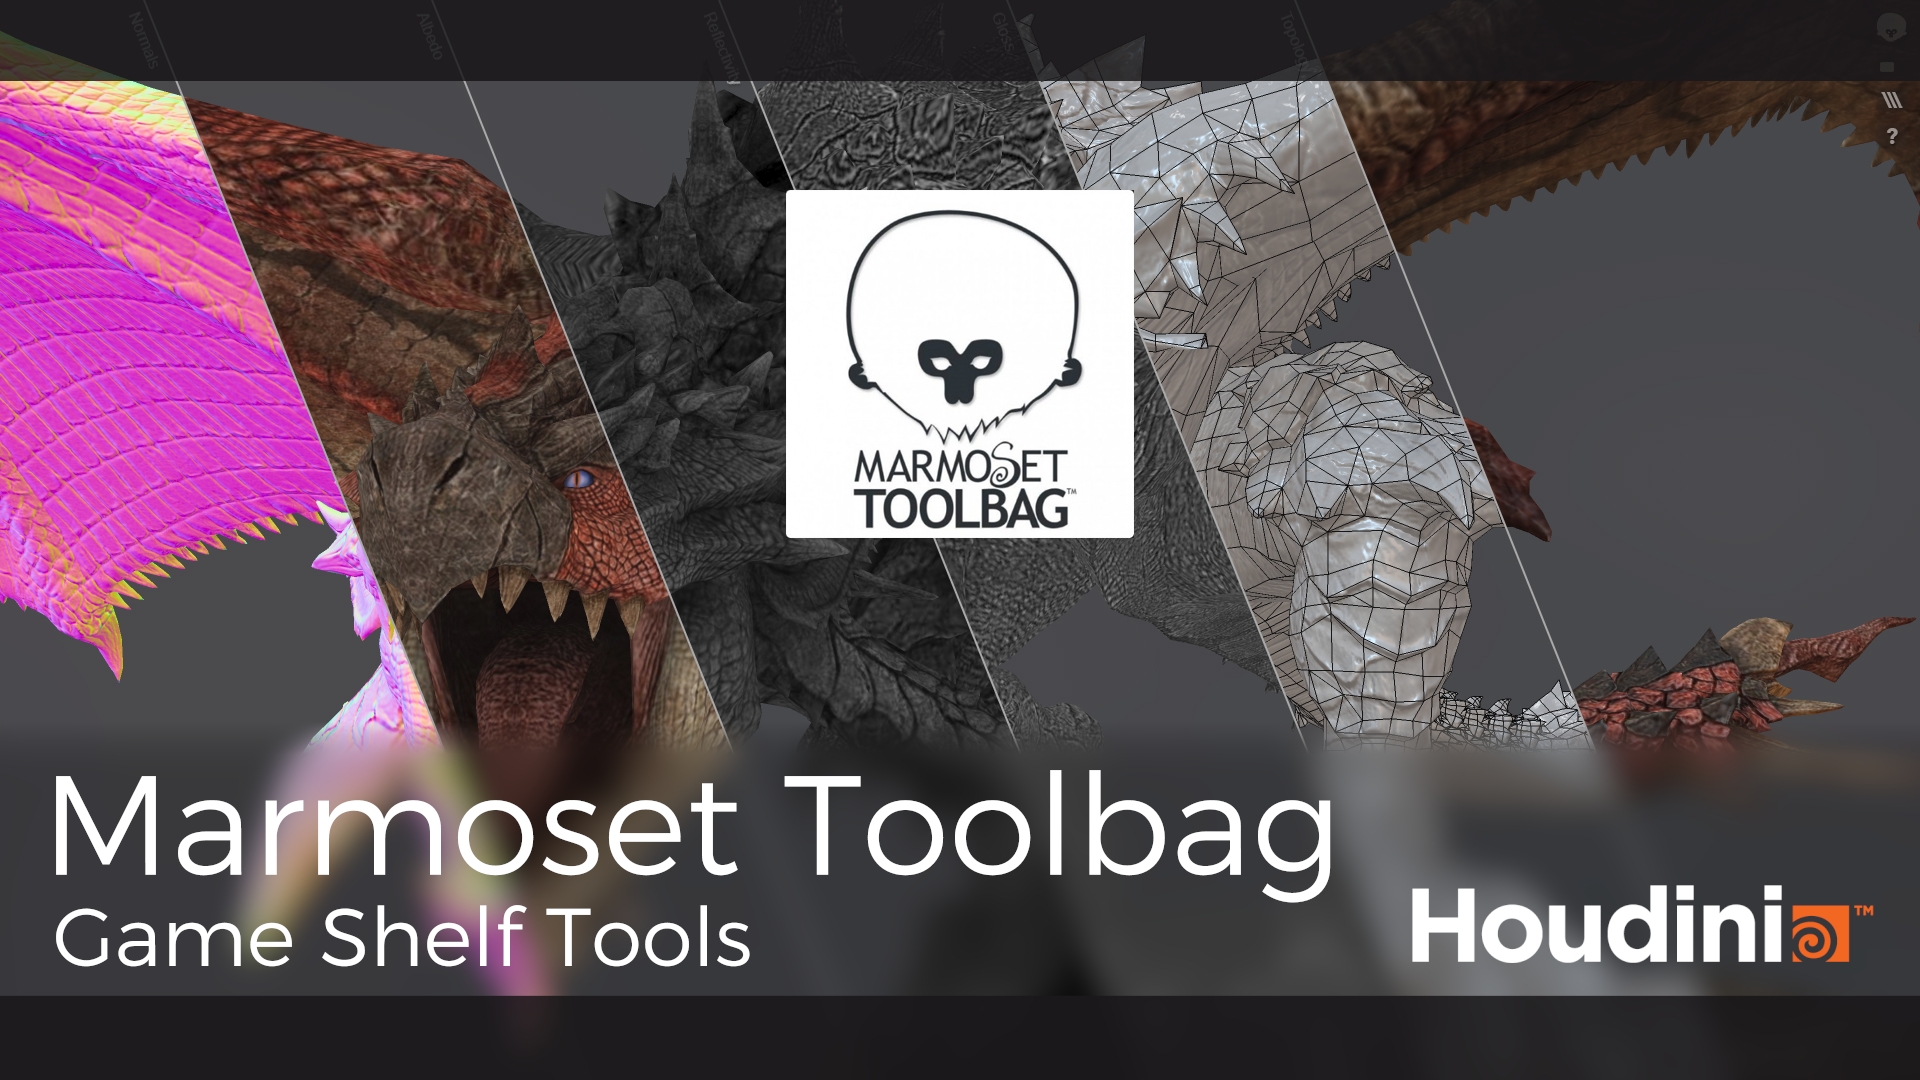 for apple download Marmoset Toolbag 4.0.6.2